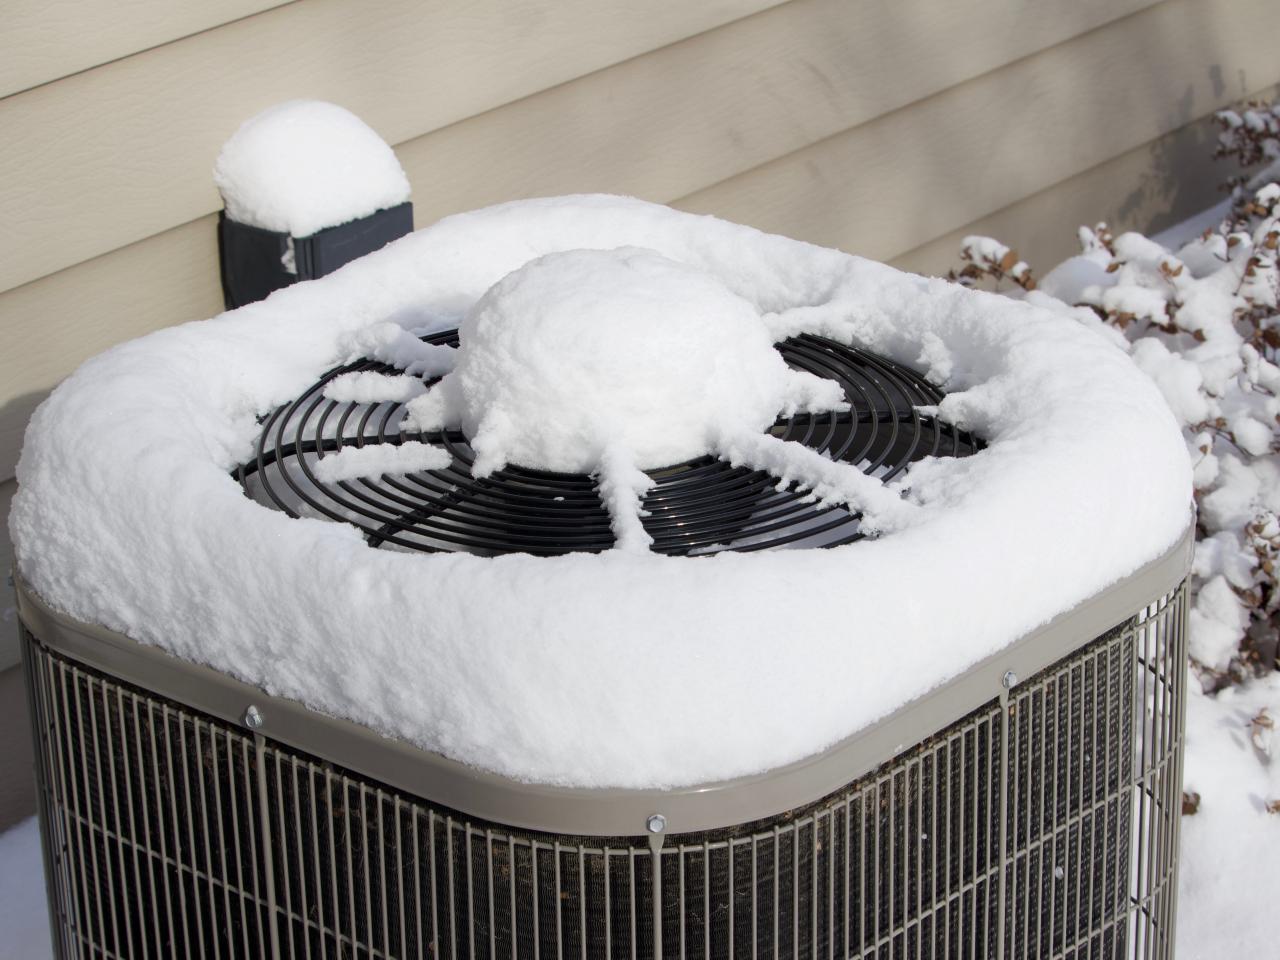 How To Winterize An Air Conditioner